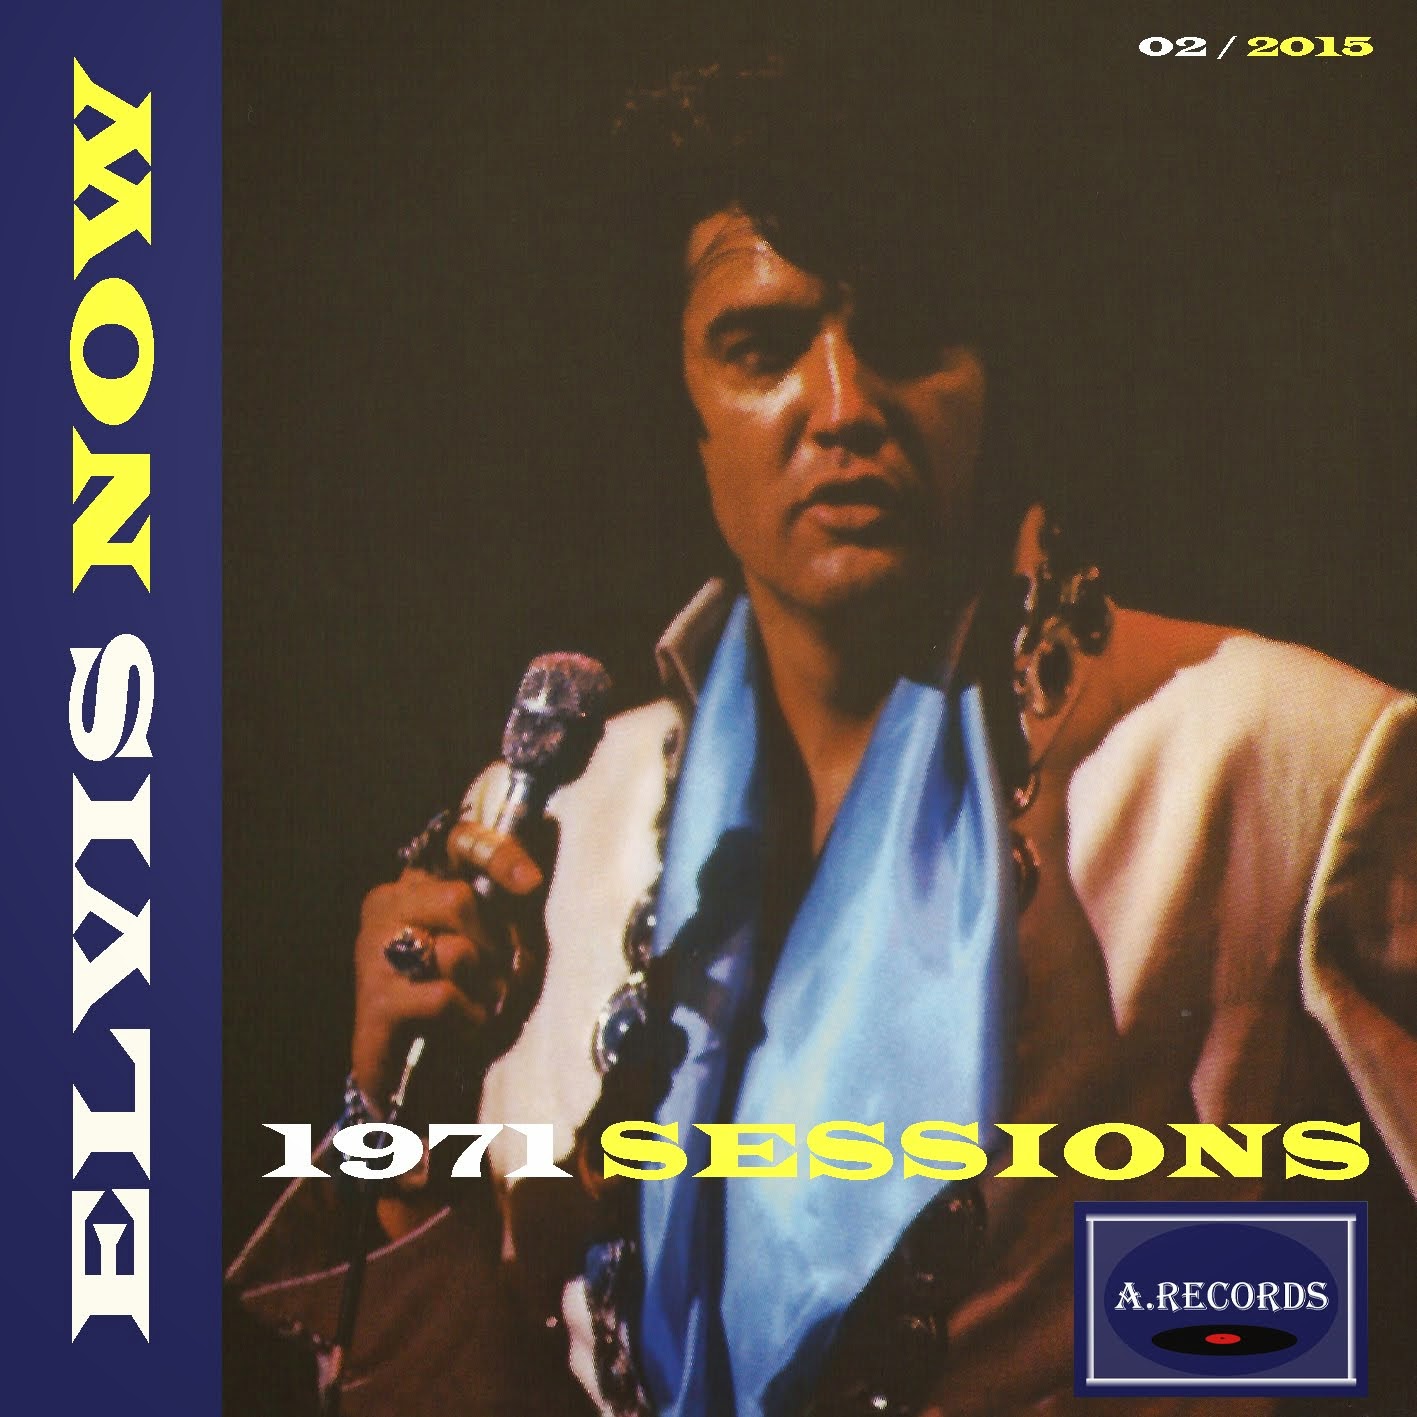 Elvis Now - 1971 Sessions (February 2015)